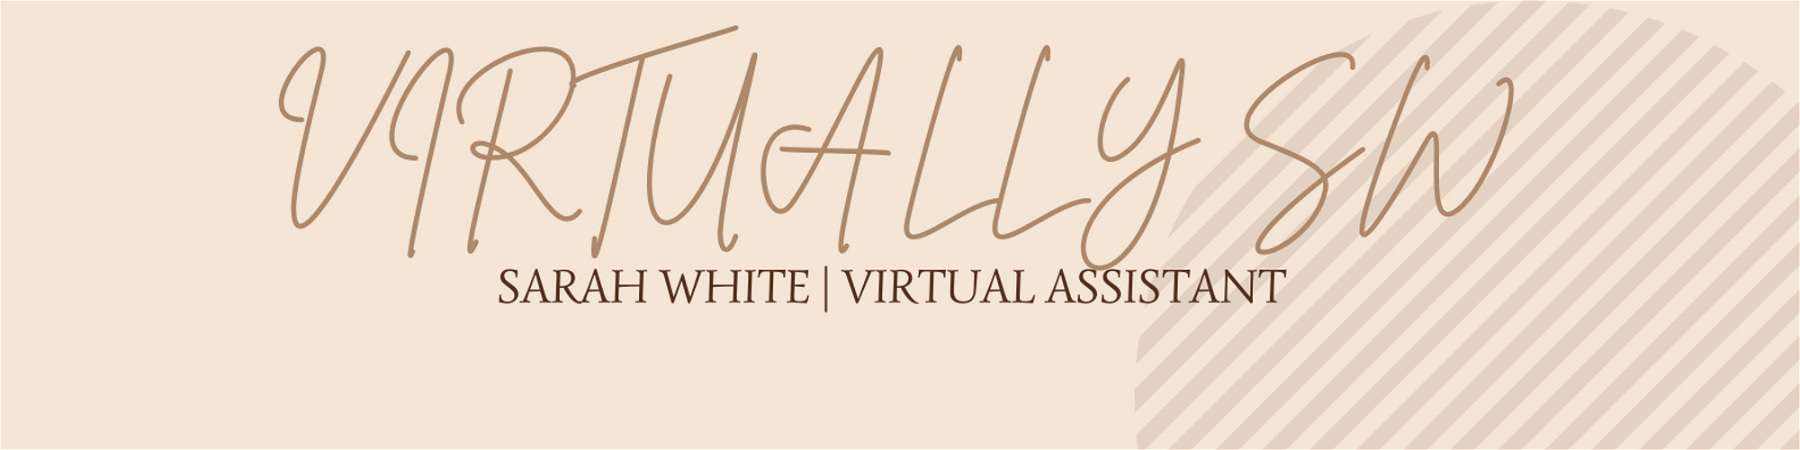 Do You Need a Virtual Assistant?